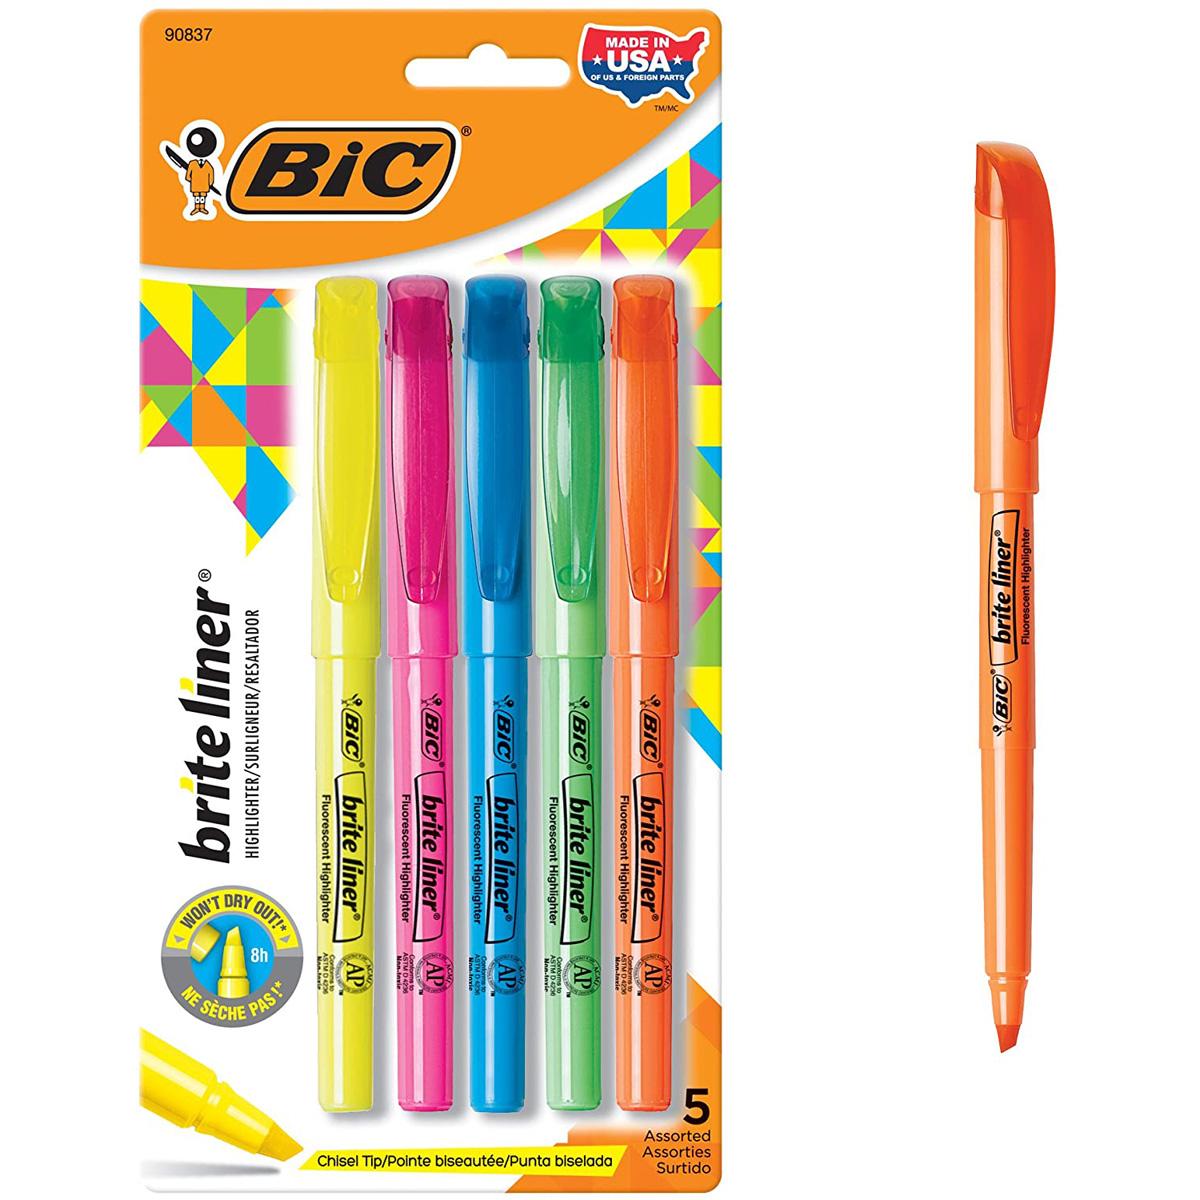 5 BIC Brite Liner Chisel Tip Highlighters for $1.52 Shipped